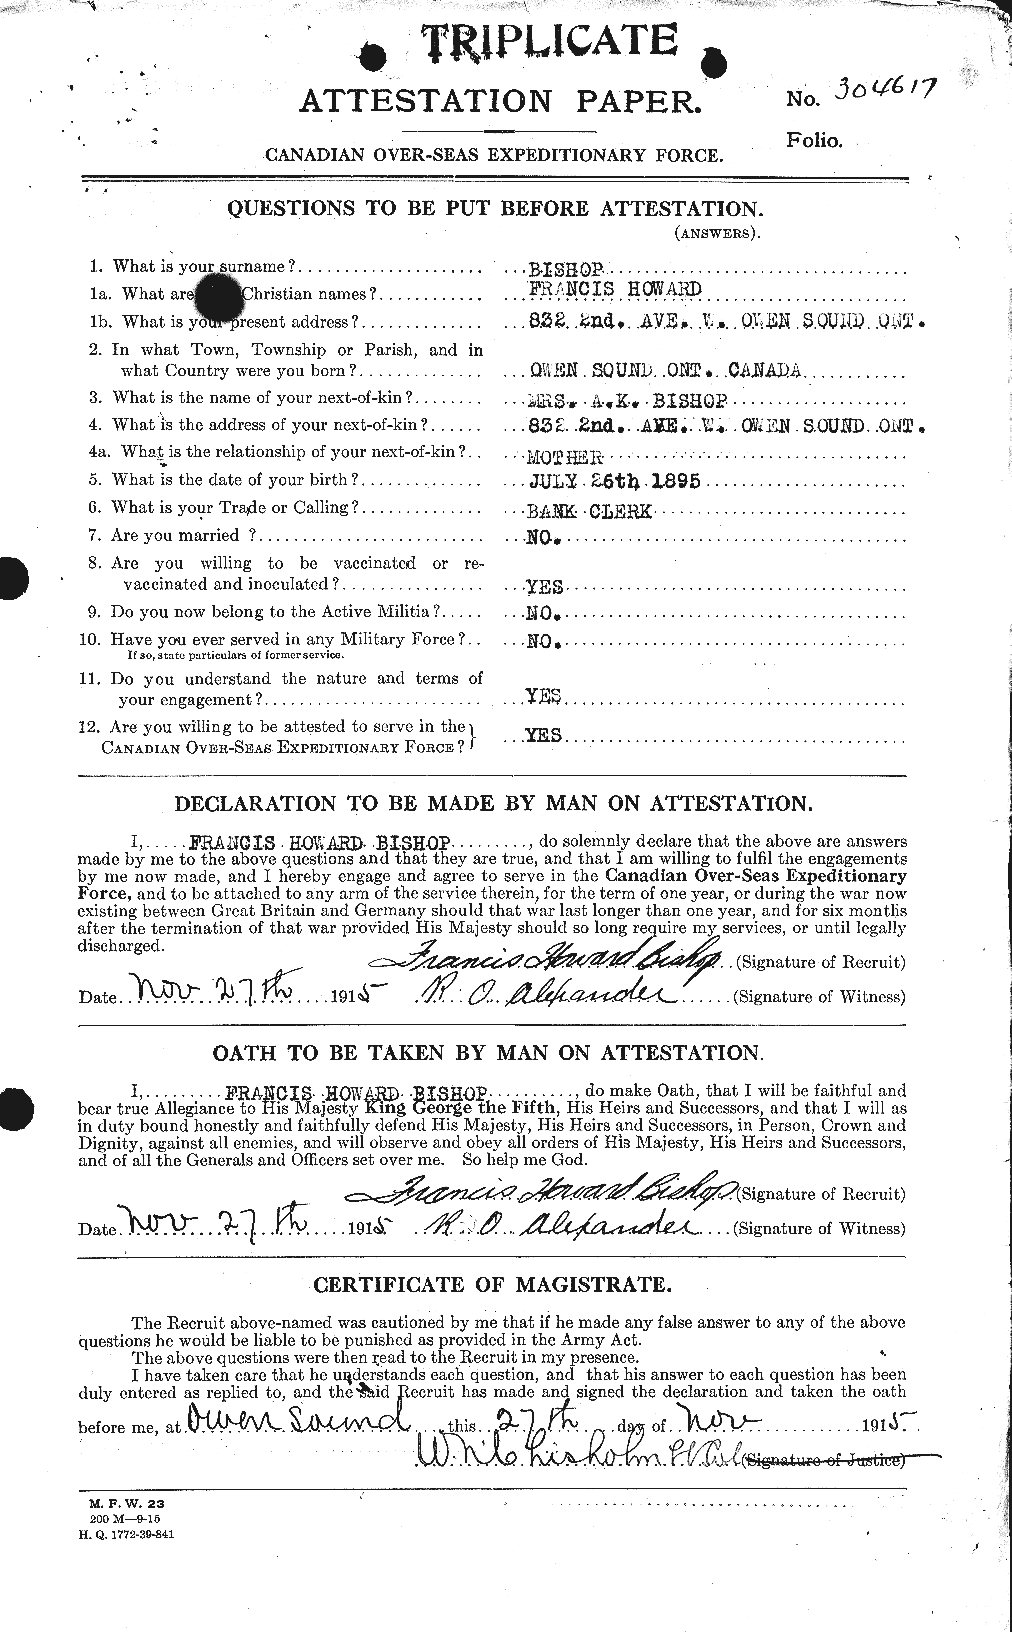 Personnel Records of the First World War - CEF 244248a